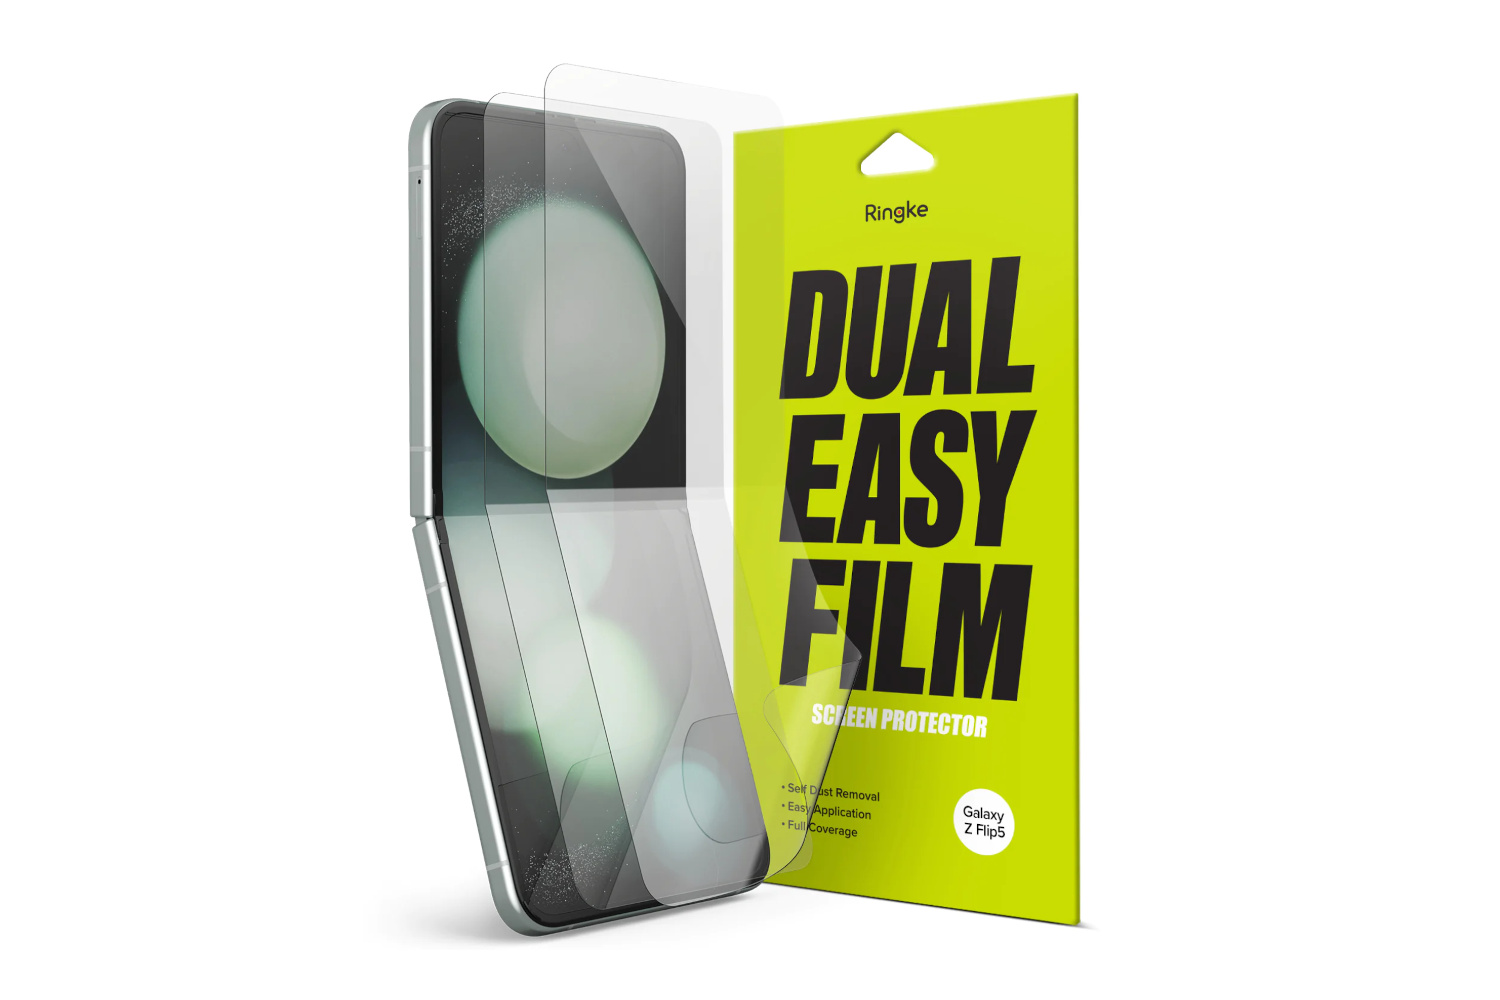 The Ringke Dual Easy screen protector for the Z Flip 5 on a blank background.